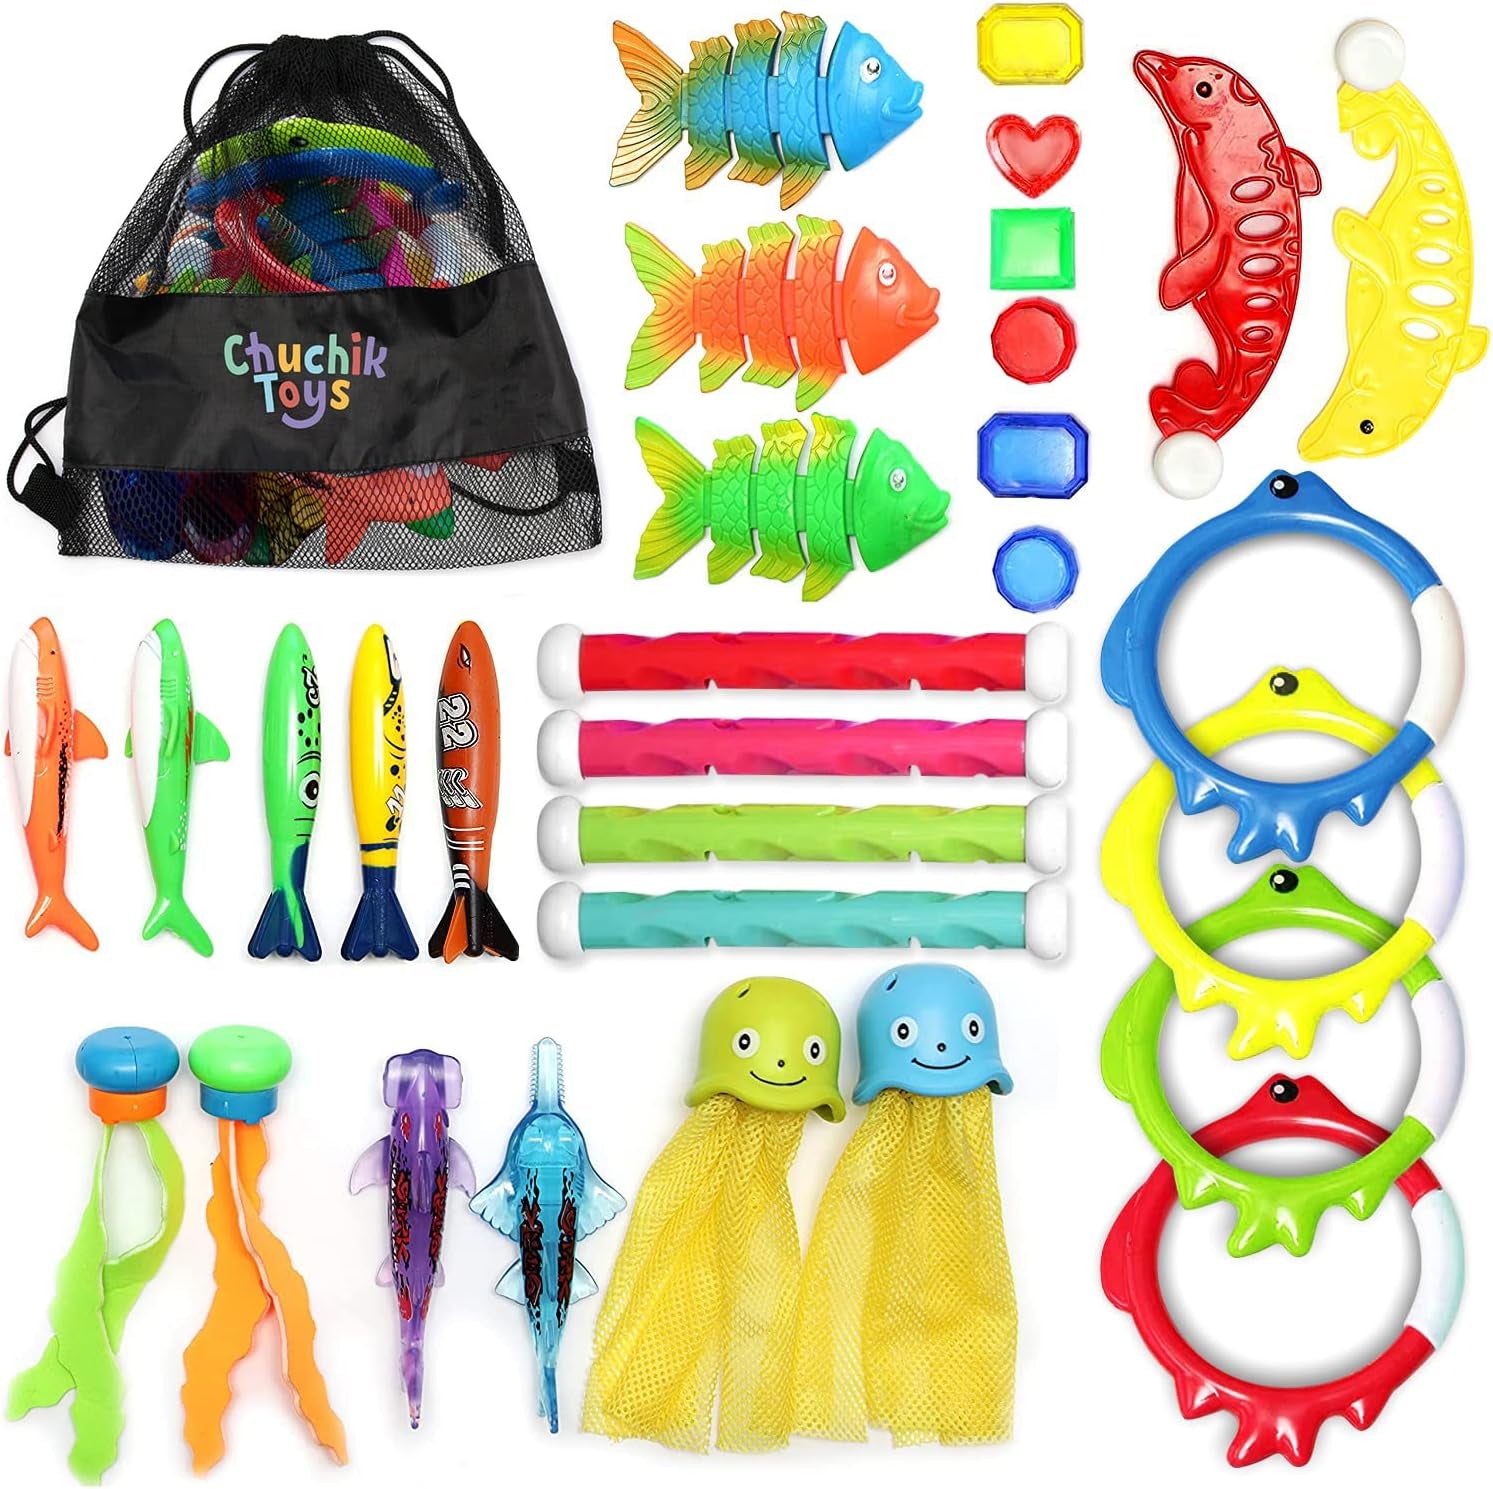 30 Pcs Diving Toys, Swimming Pool Toys for Kids Ages 4-8 8-12 with a Storage Net Bag. Pool Dive Toys for Kids. Pool Games, Swim Summer Water Toys. Include Diving Sticks & Pool Rings